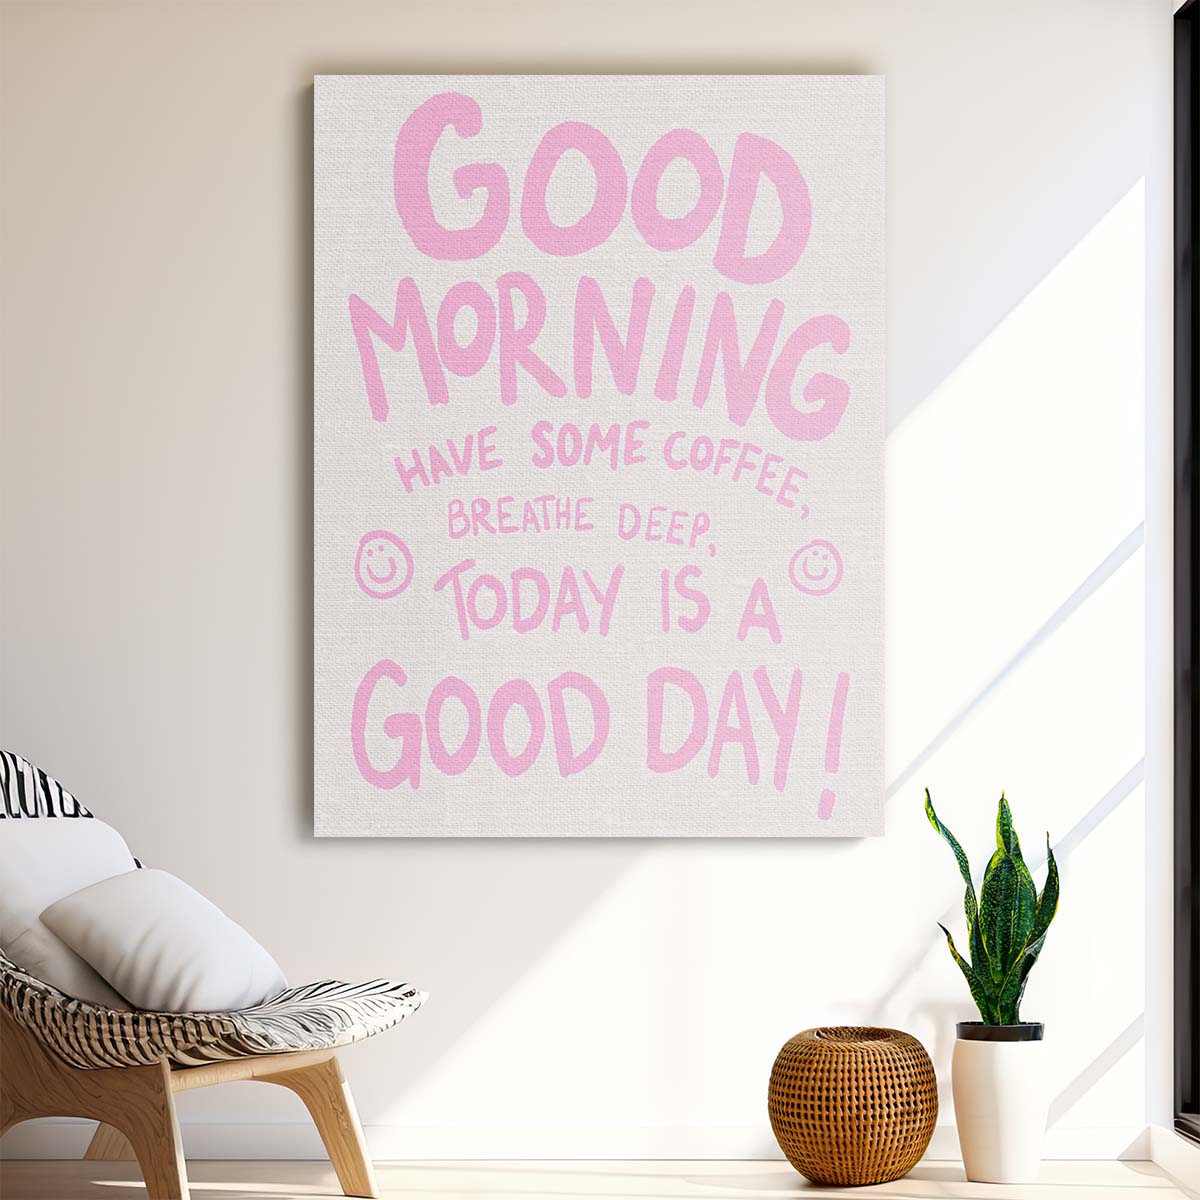 Good Morning Inspirational Quote Illustration with Bright Sunrise by Luxuriance Designs, made in USA